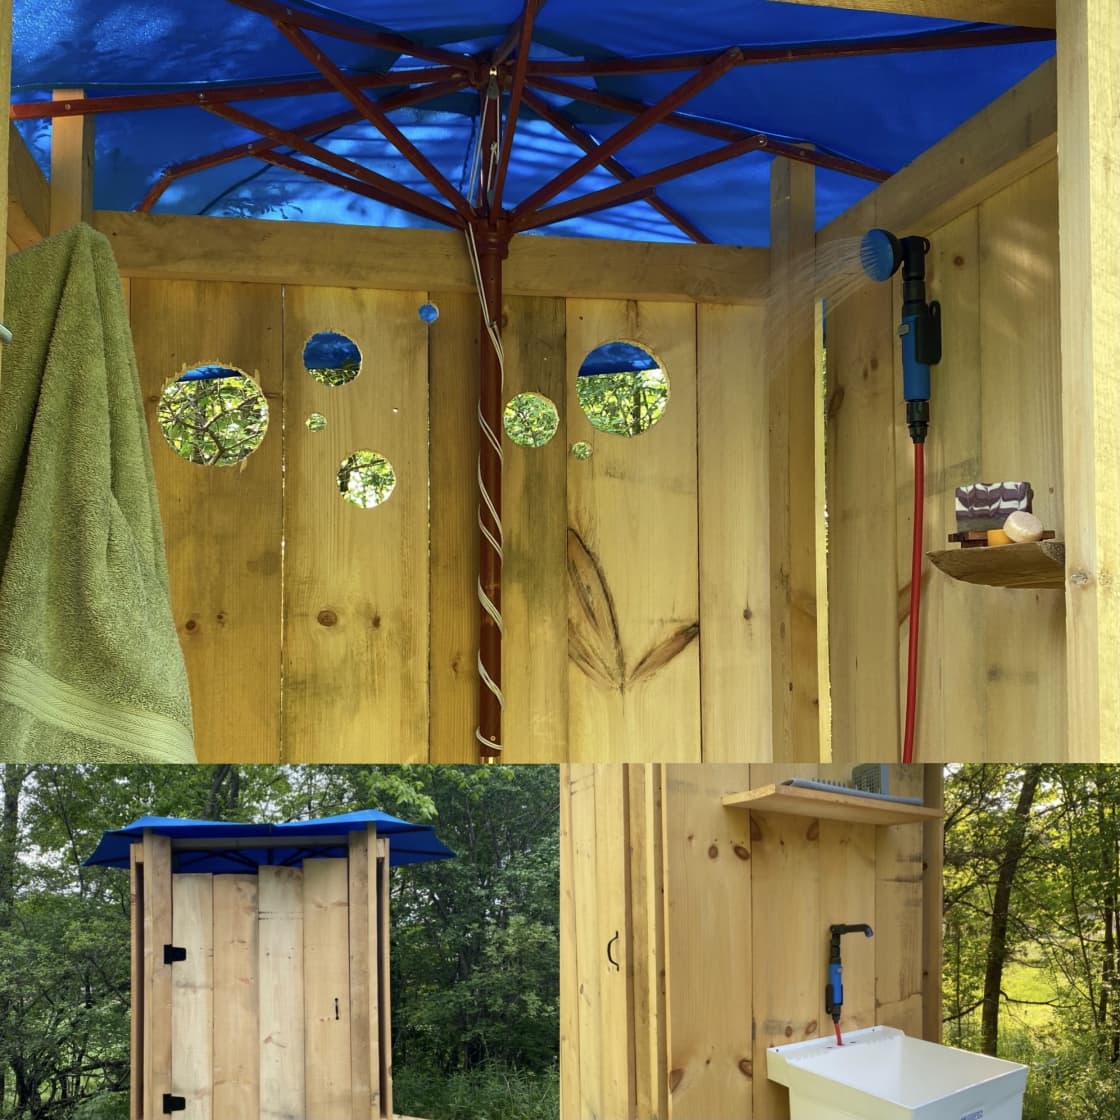 Off-Grid Hot shower and Dish washing sink